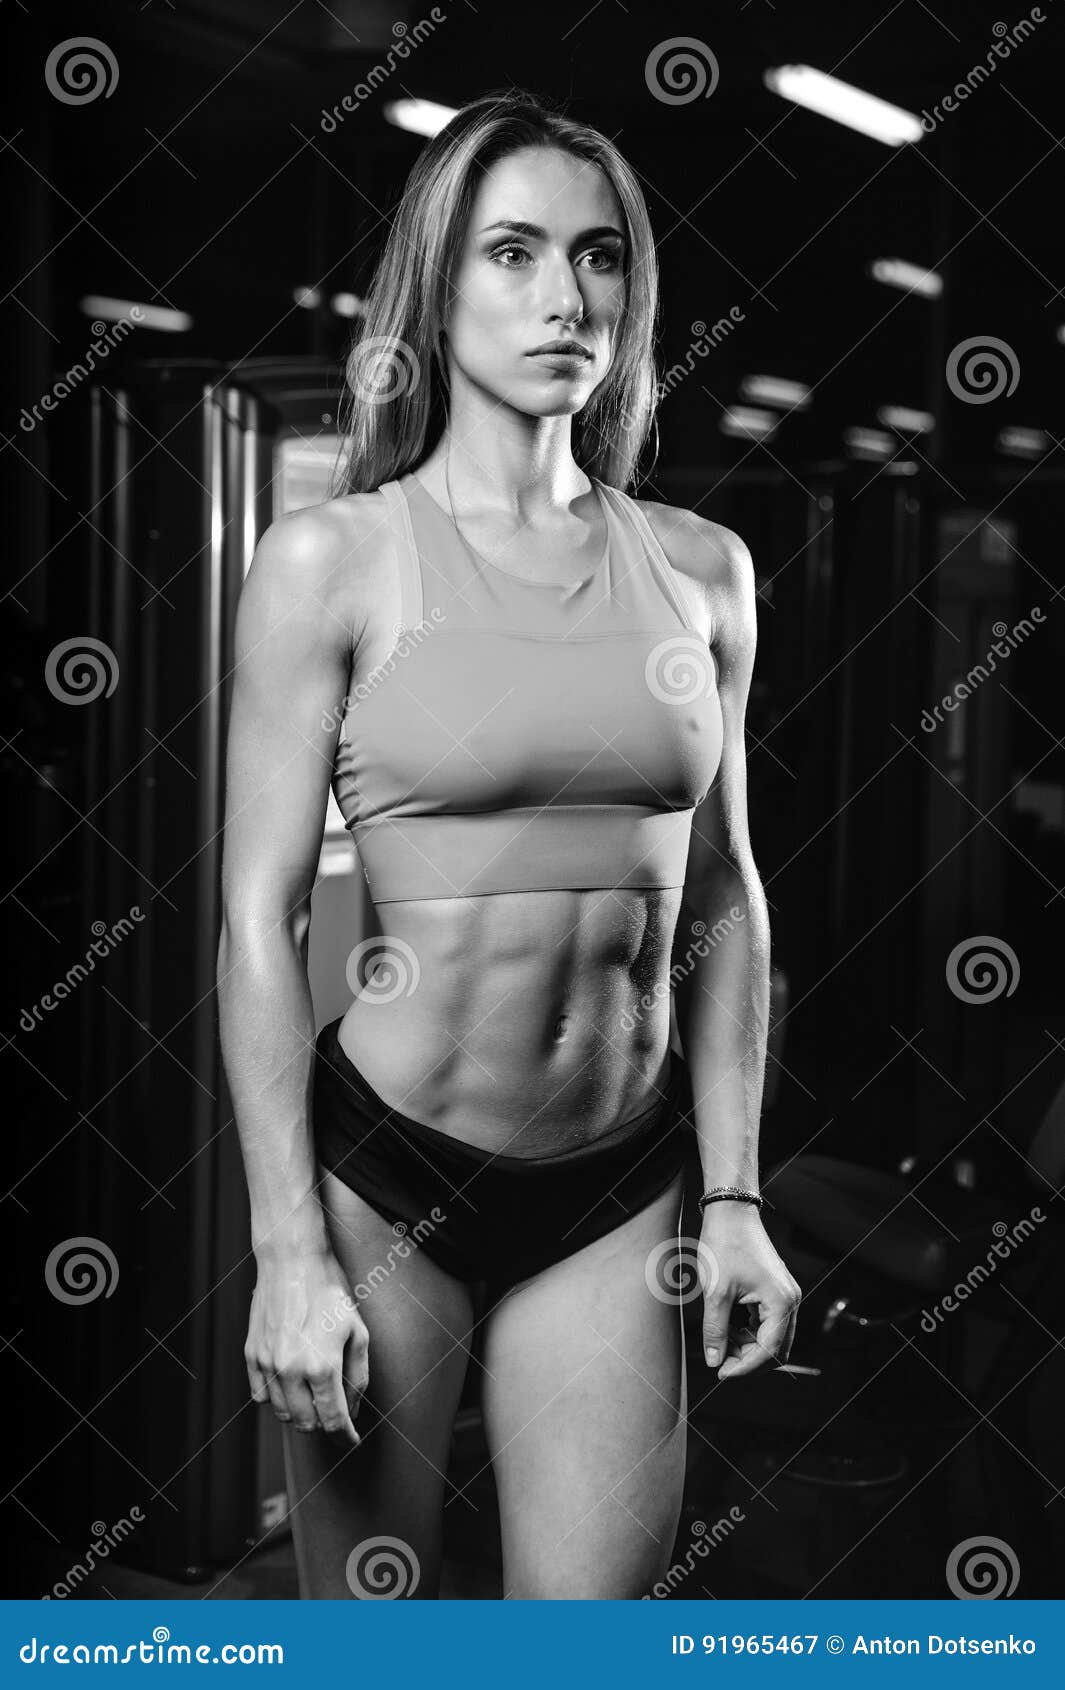 Caucasian Fitness Female Model in Gym Close Up Abs Stock Image